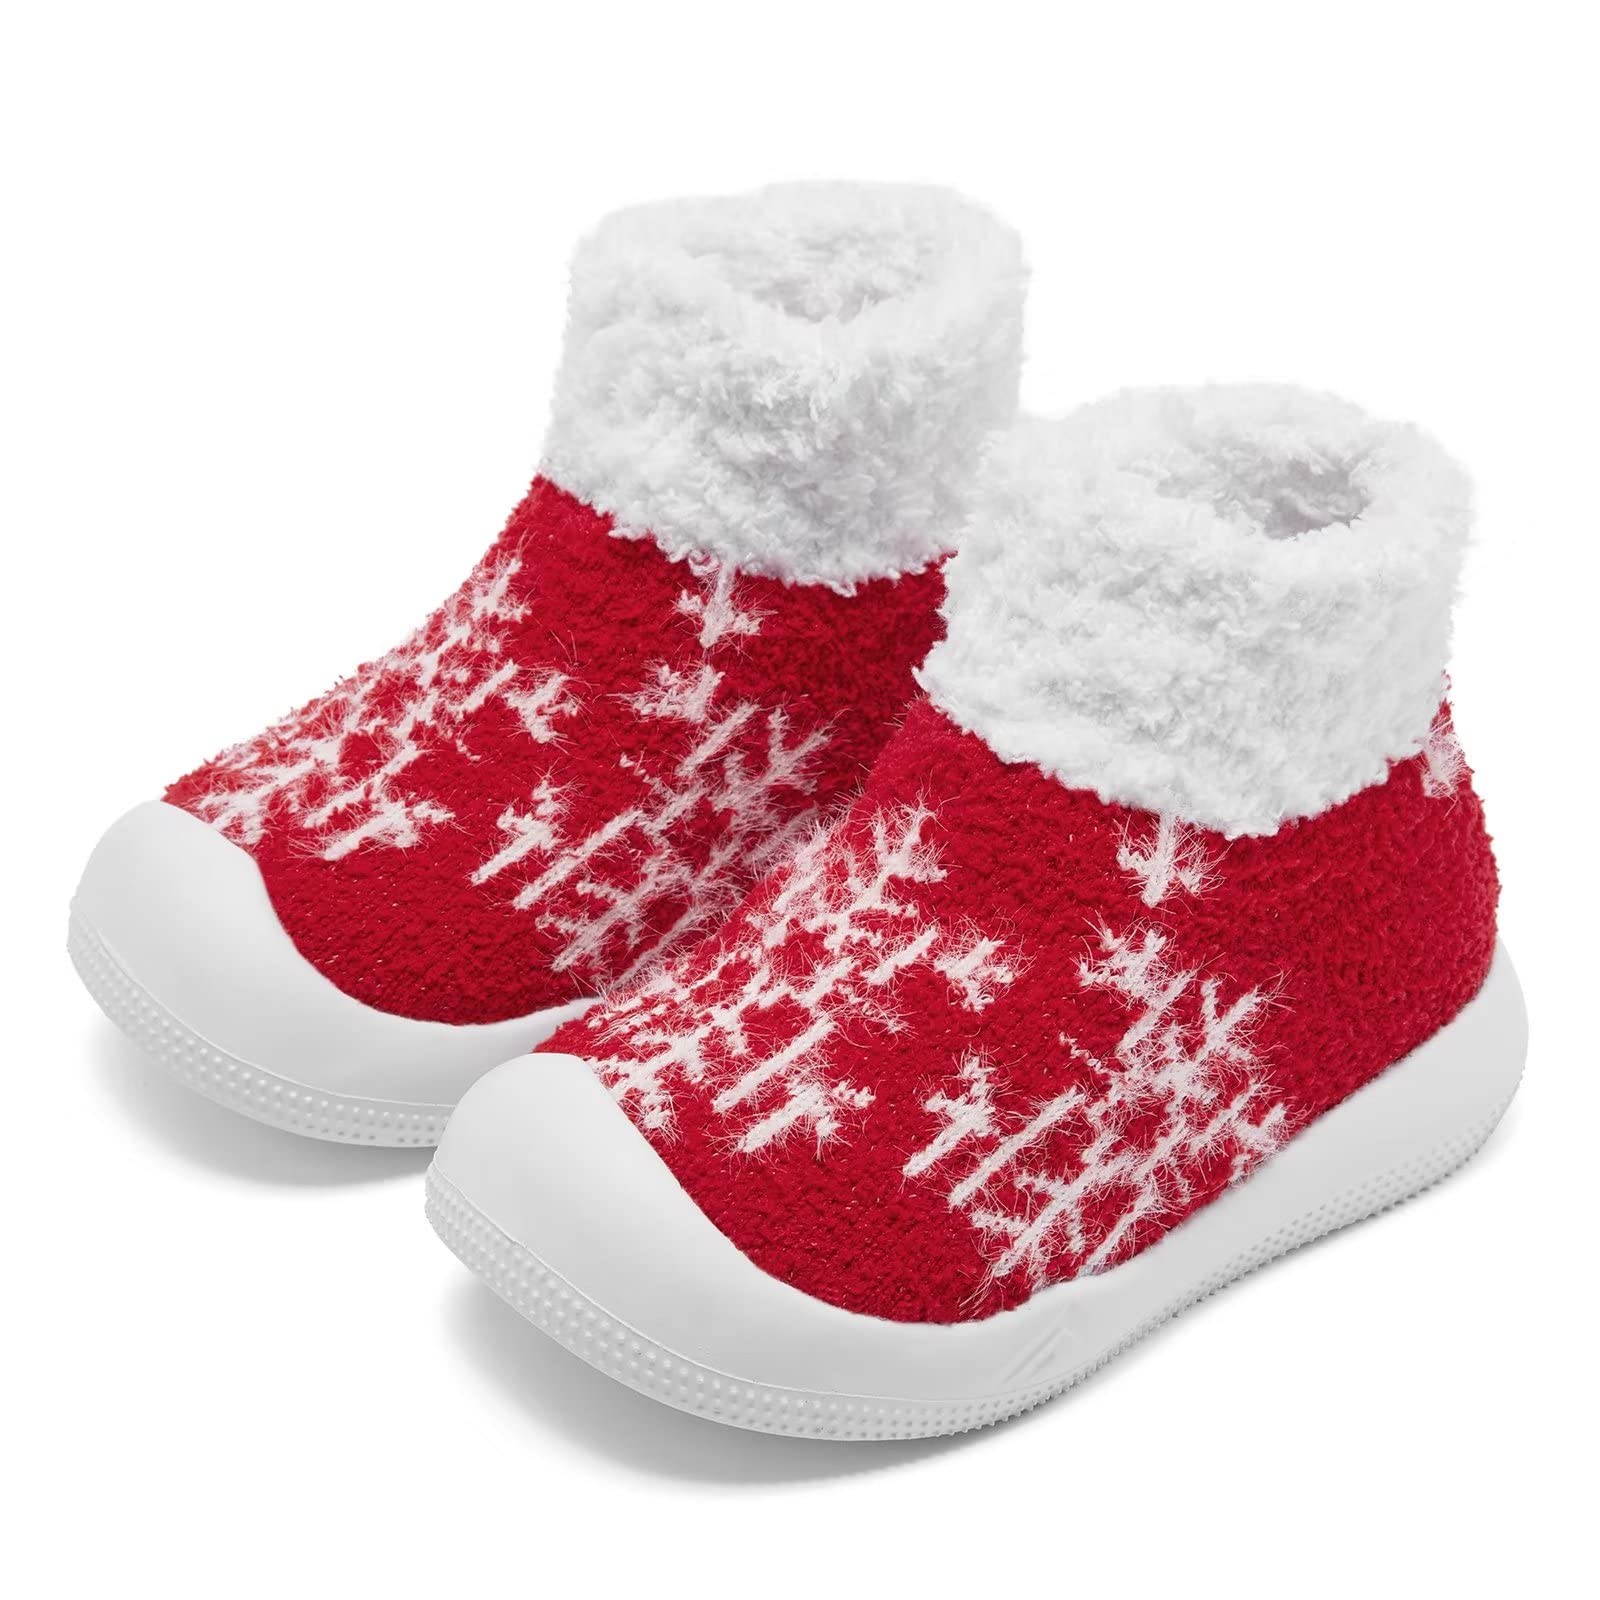 Eashi christmas Baby Shoes girls Boys Warm Baby winter shoes cozy Fleece Booties Fuzzy Sock Shoes With Soft Rubber Sole Infant S